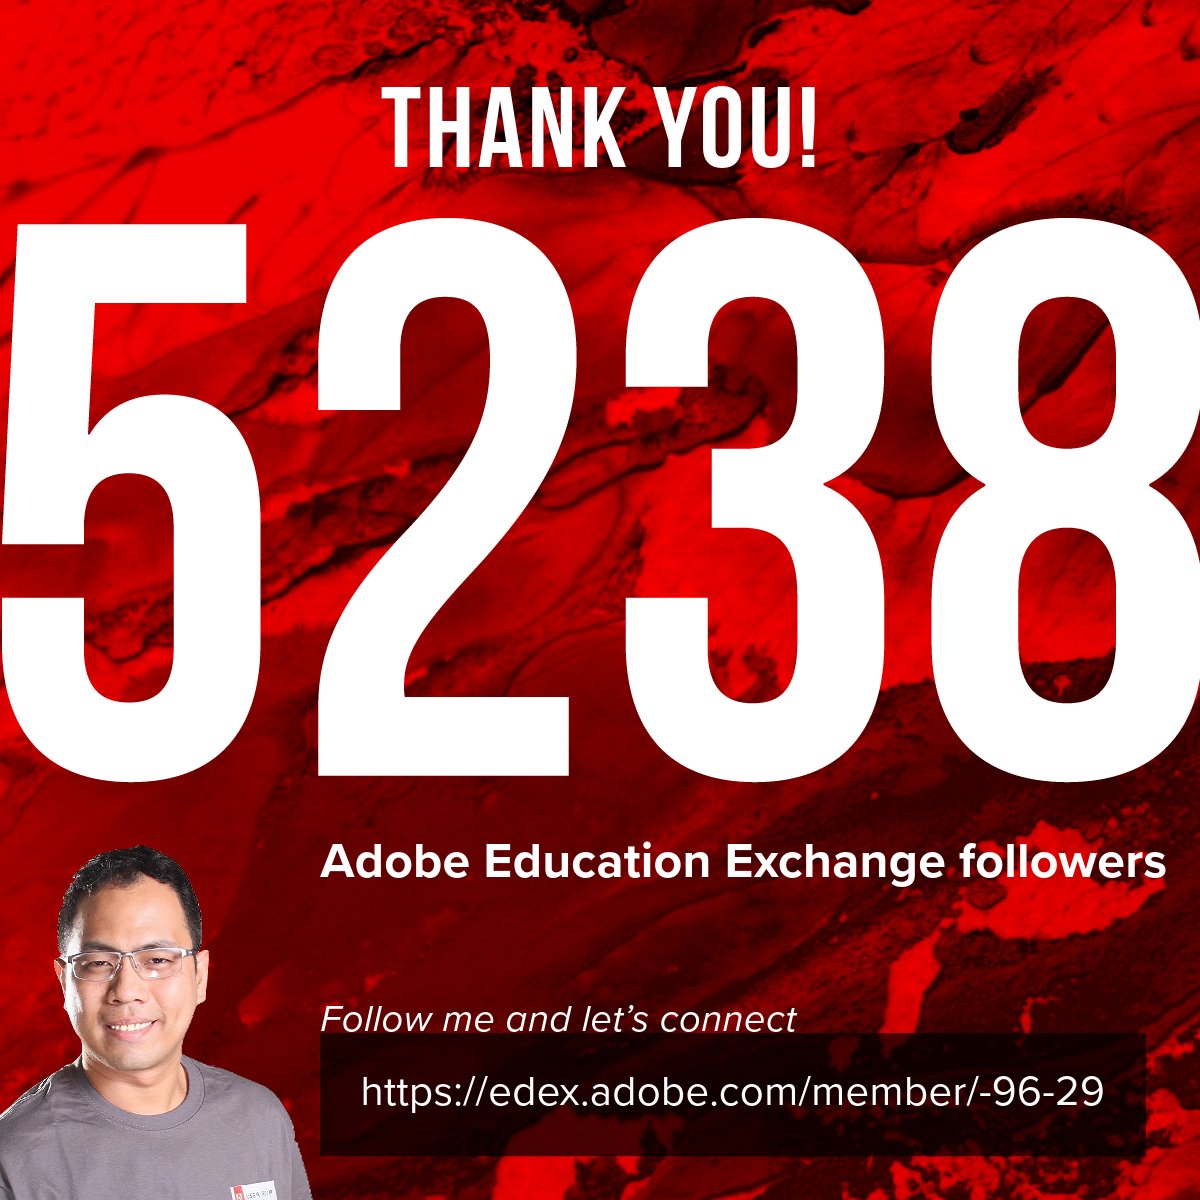 Celebrating small wins!
Thank you to the 5230+ followers in Adobe Education Exchange.
Let's start connecting and learning from each other.
Keep on building a better #creativenationph for we are #bettertogether.
Yours truly, #ccevangelistph #fatheraceph #AdobeEduCreative